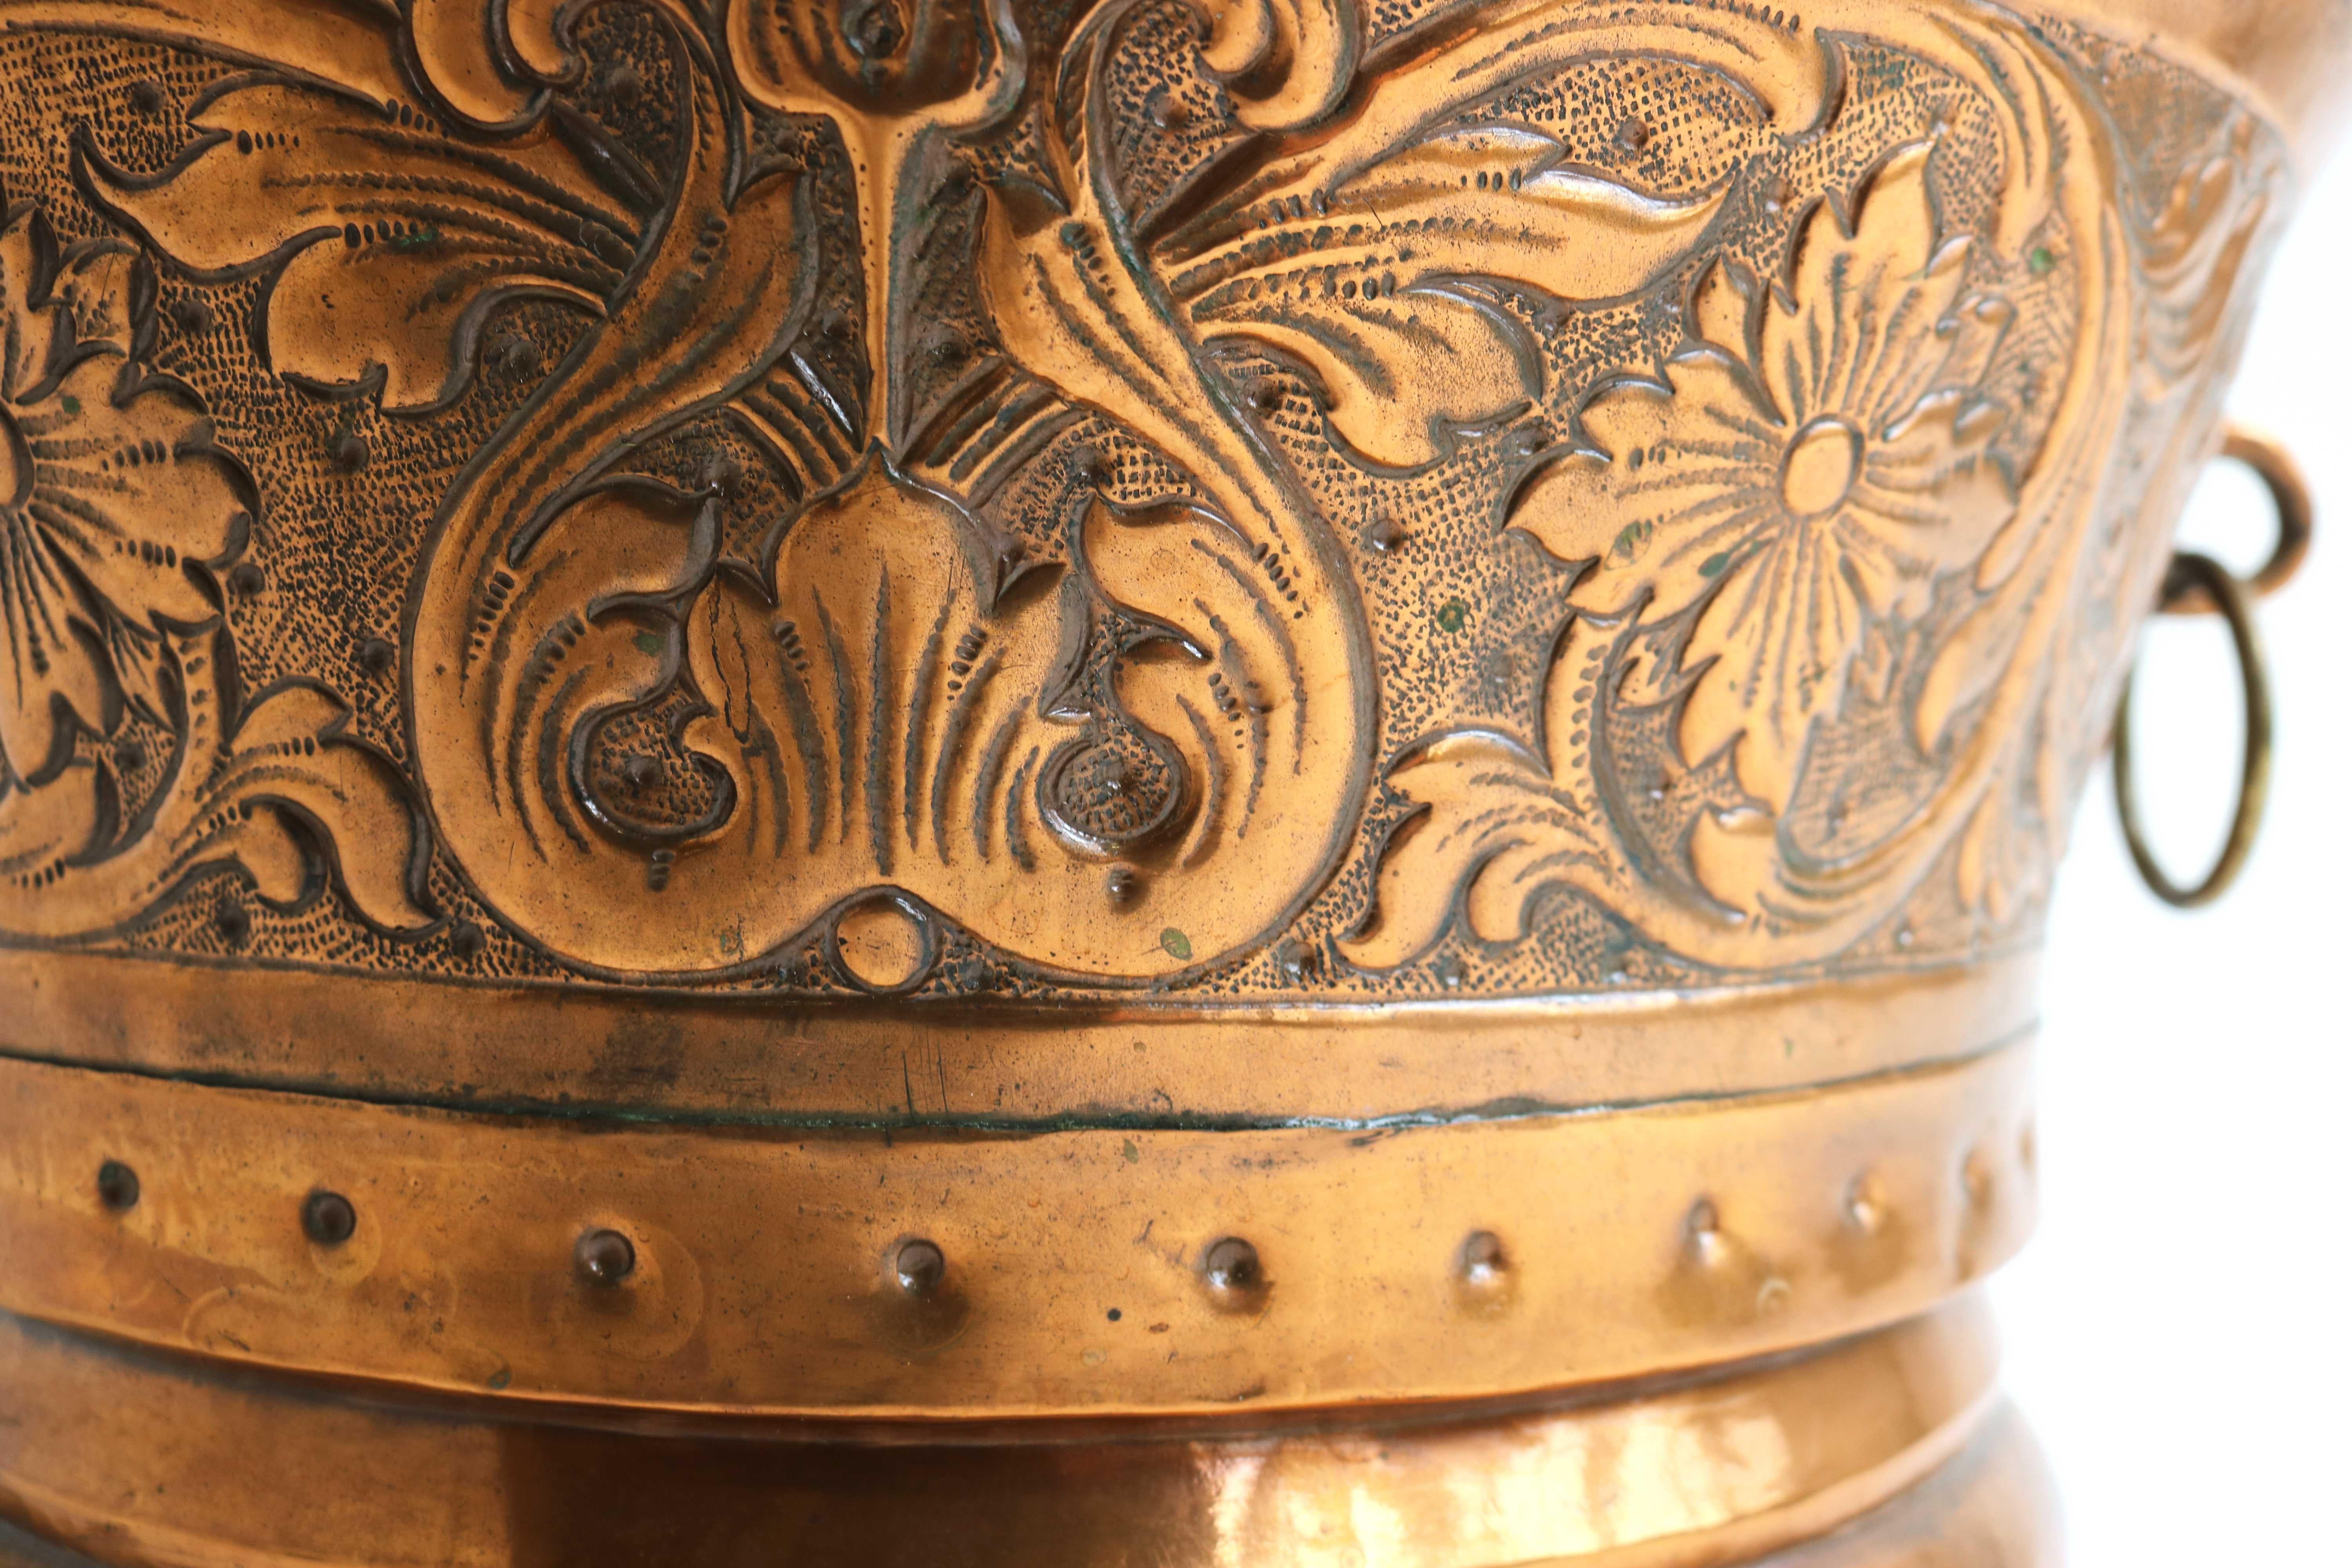 Decorated Dutch Antique Copper Bowl / Pot with Lid, 18th Century, Dated 1750 For Sale 1